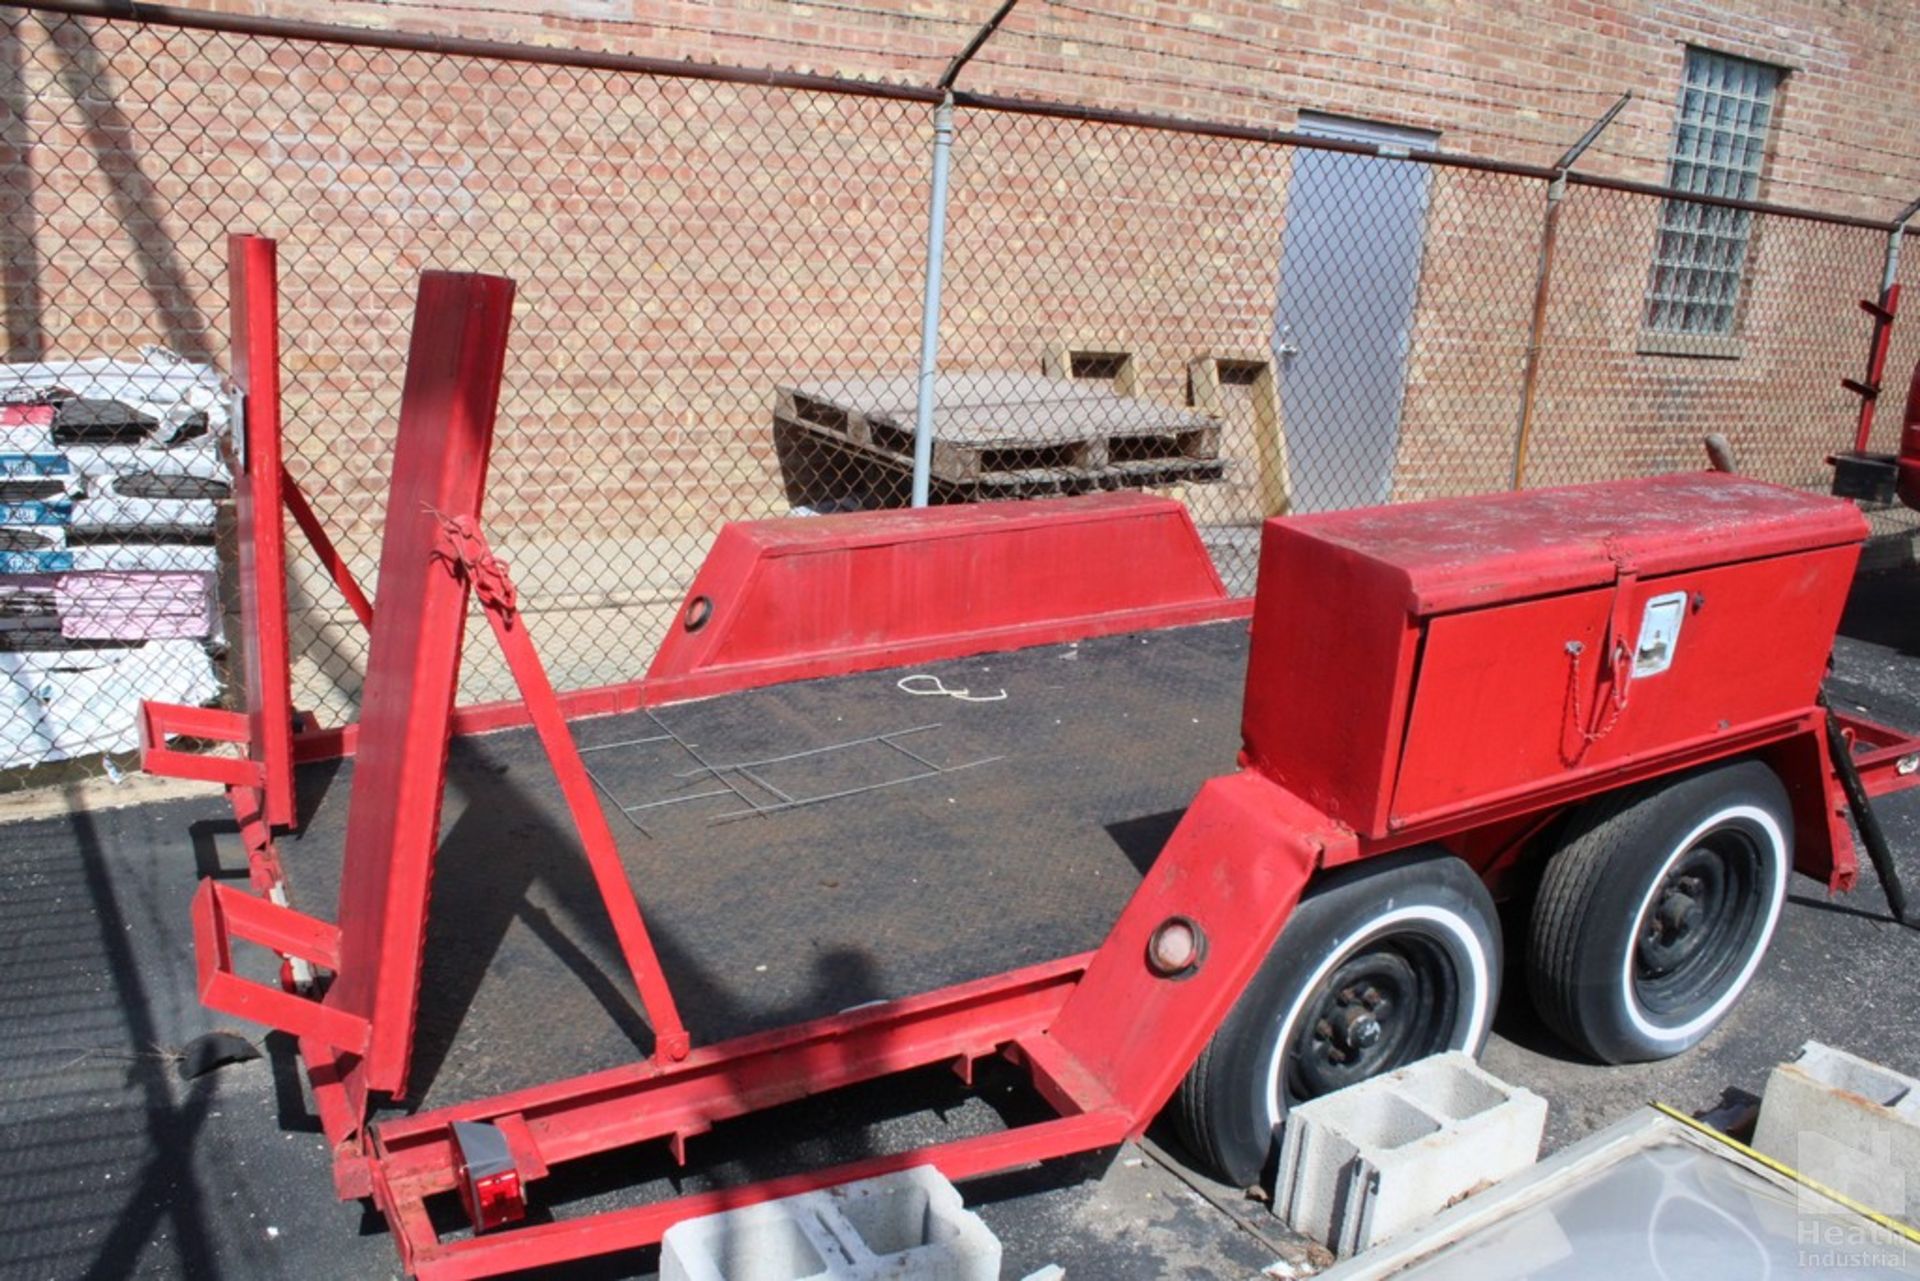 1988 IDEAL TANDEM AXLE TRAILER, 12' X 65" WITH RAMPS AND HAND WINCH, VIN 127DH1025J1007538 - Image 3 of 3